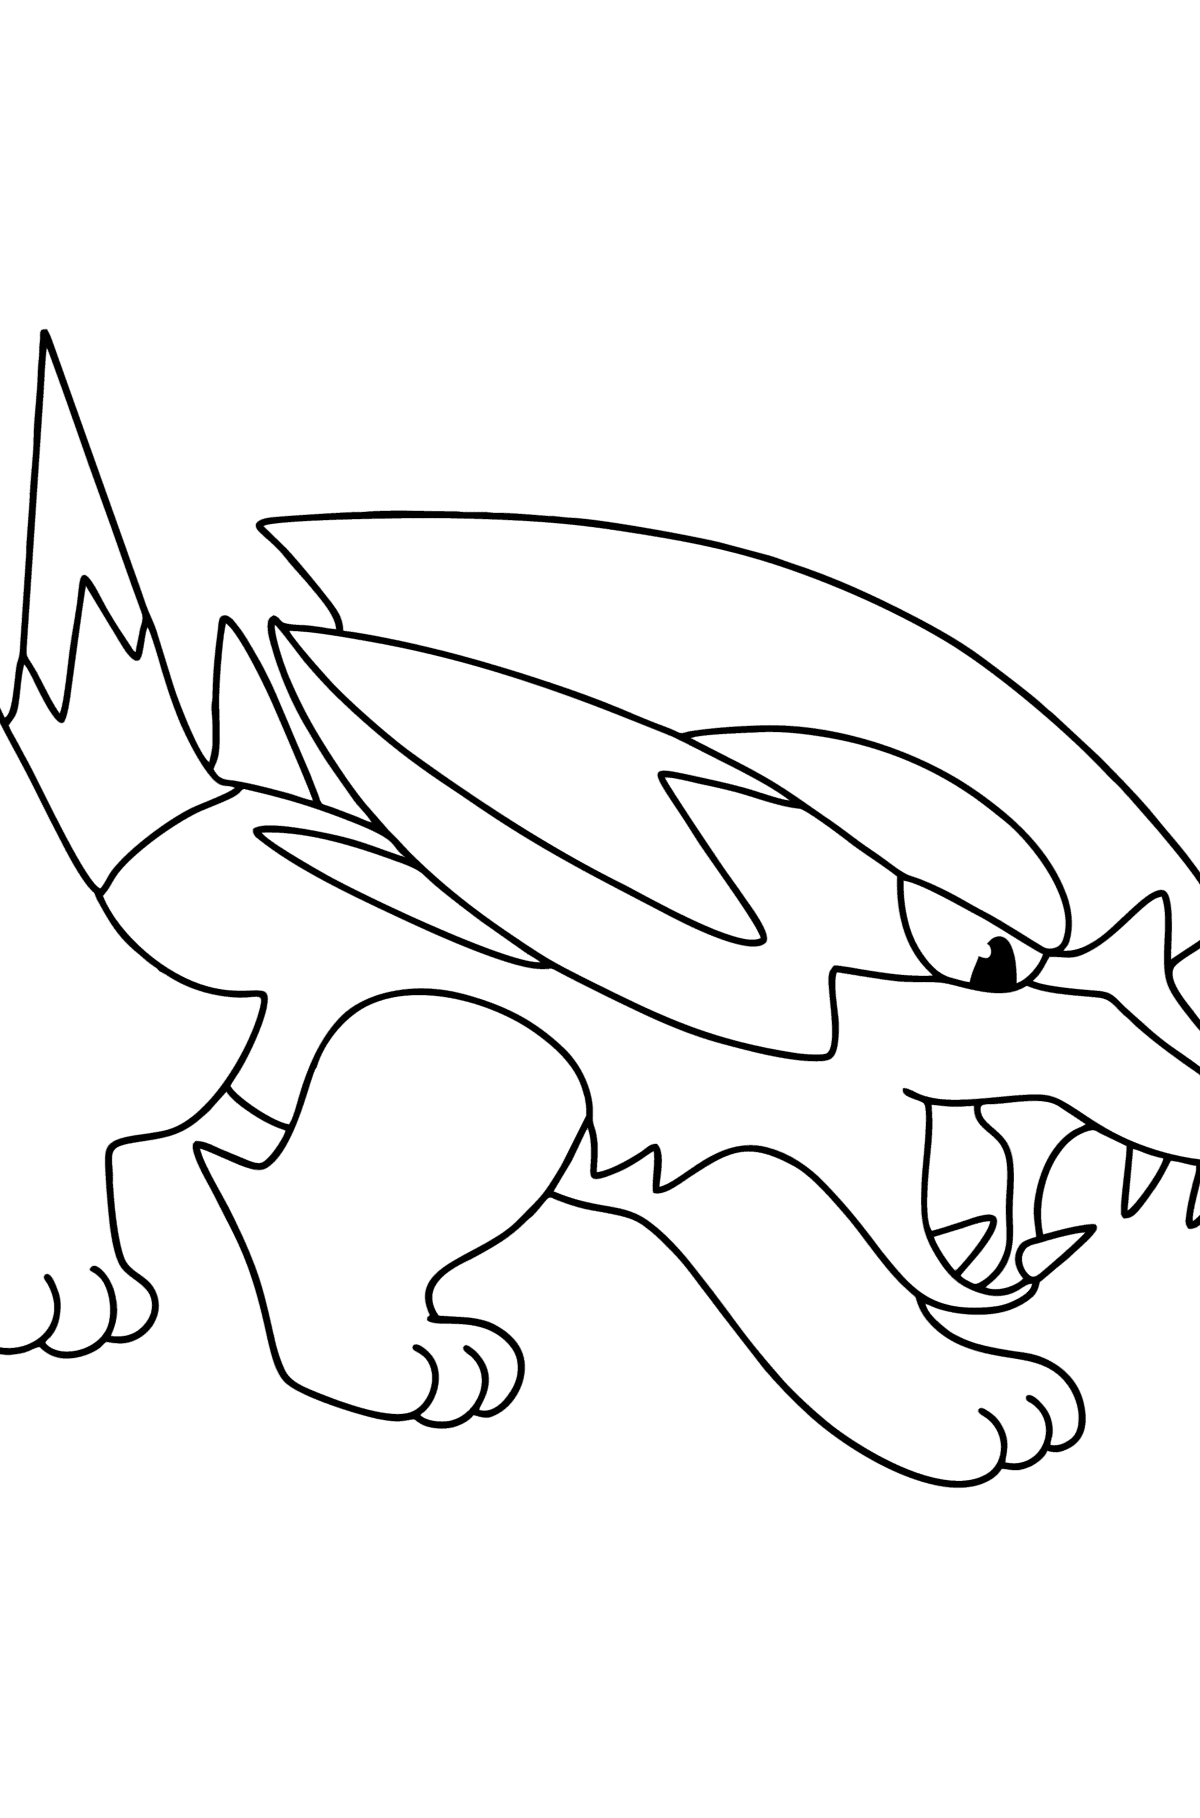 Colouring page Pokémon X and Y Electrike - Coloring Pages for Kids